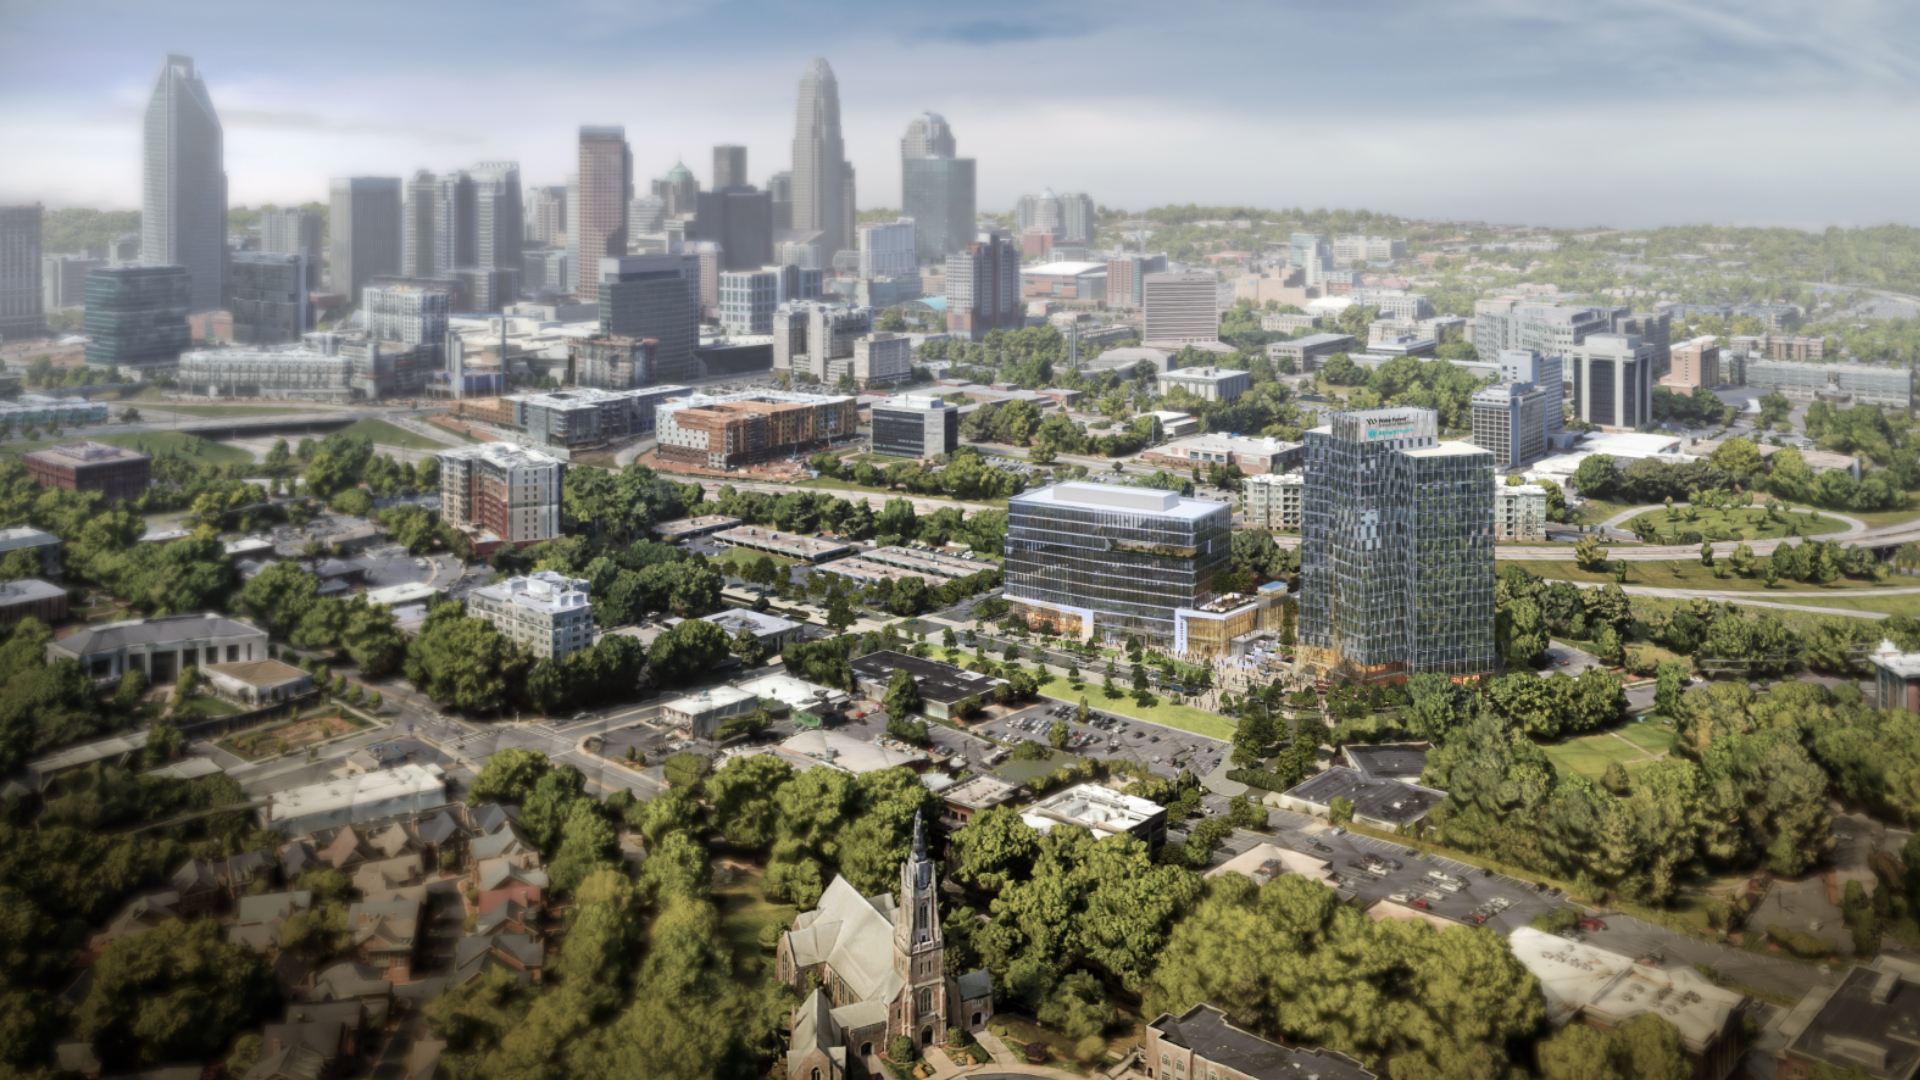 Wake Forest School of Medicine Charlotte to Be Built in Midtown Charlotte